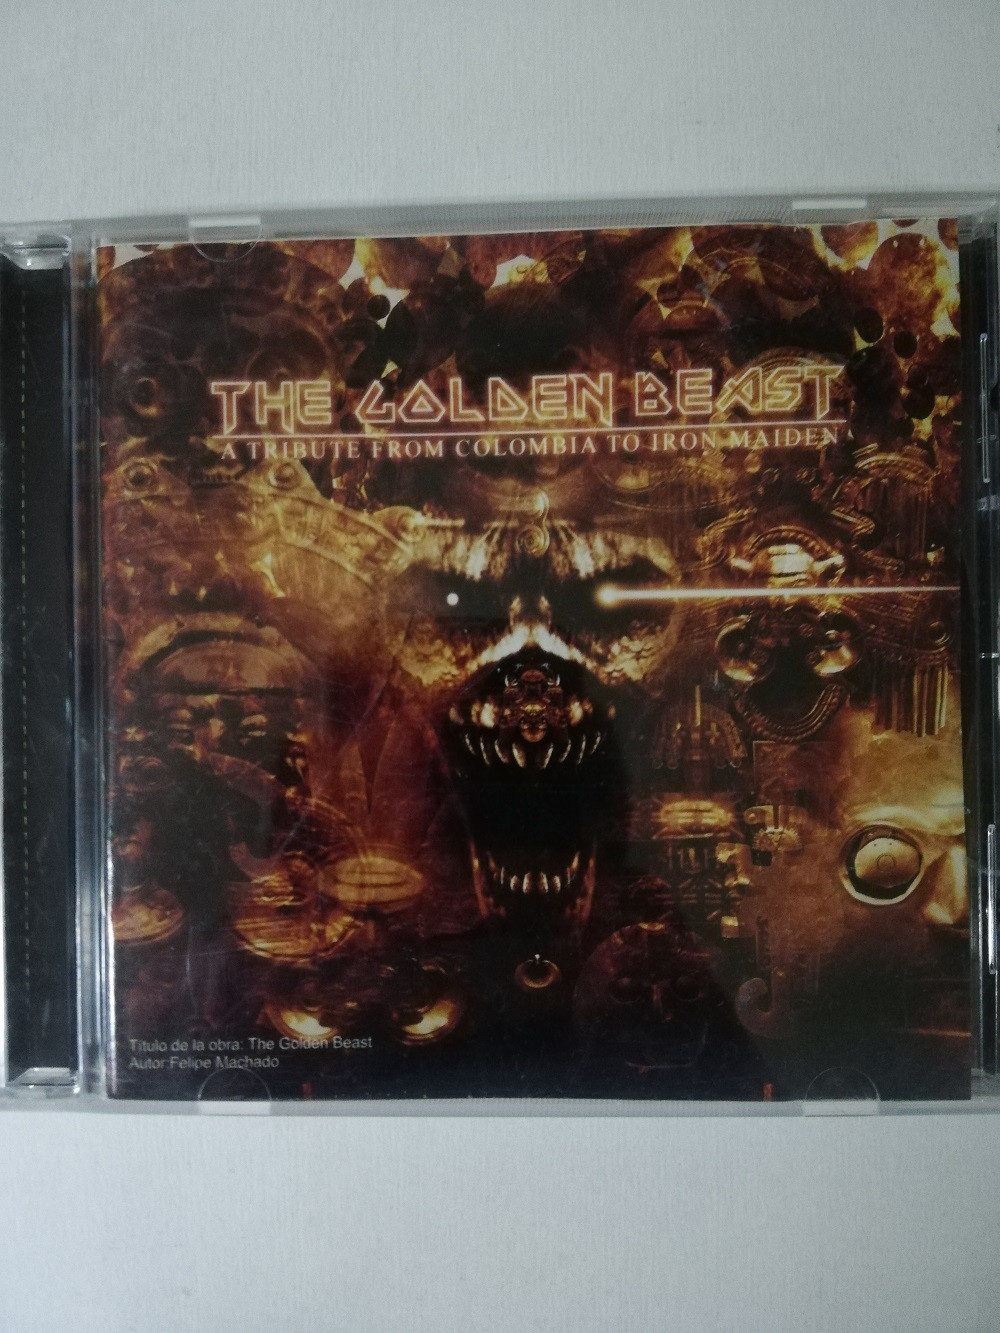 Imagen CD THE GOLDEN BEAST - A TRIBUTE FROM COLOMBIA TO IRON MAIDEN 1